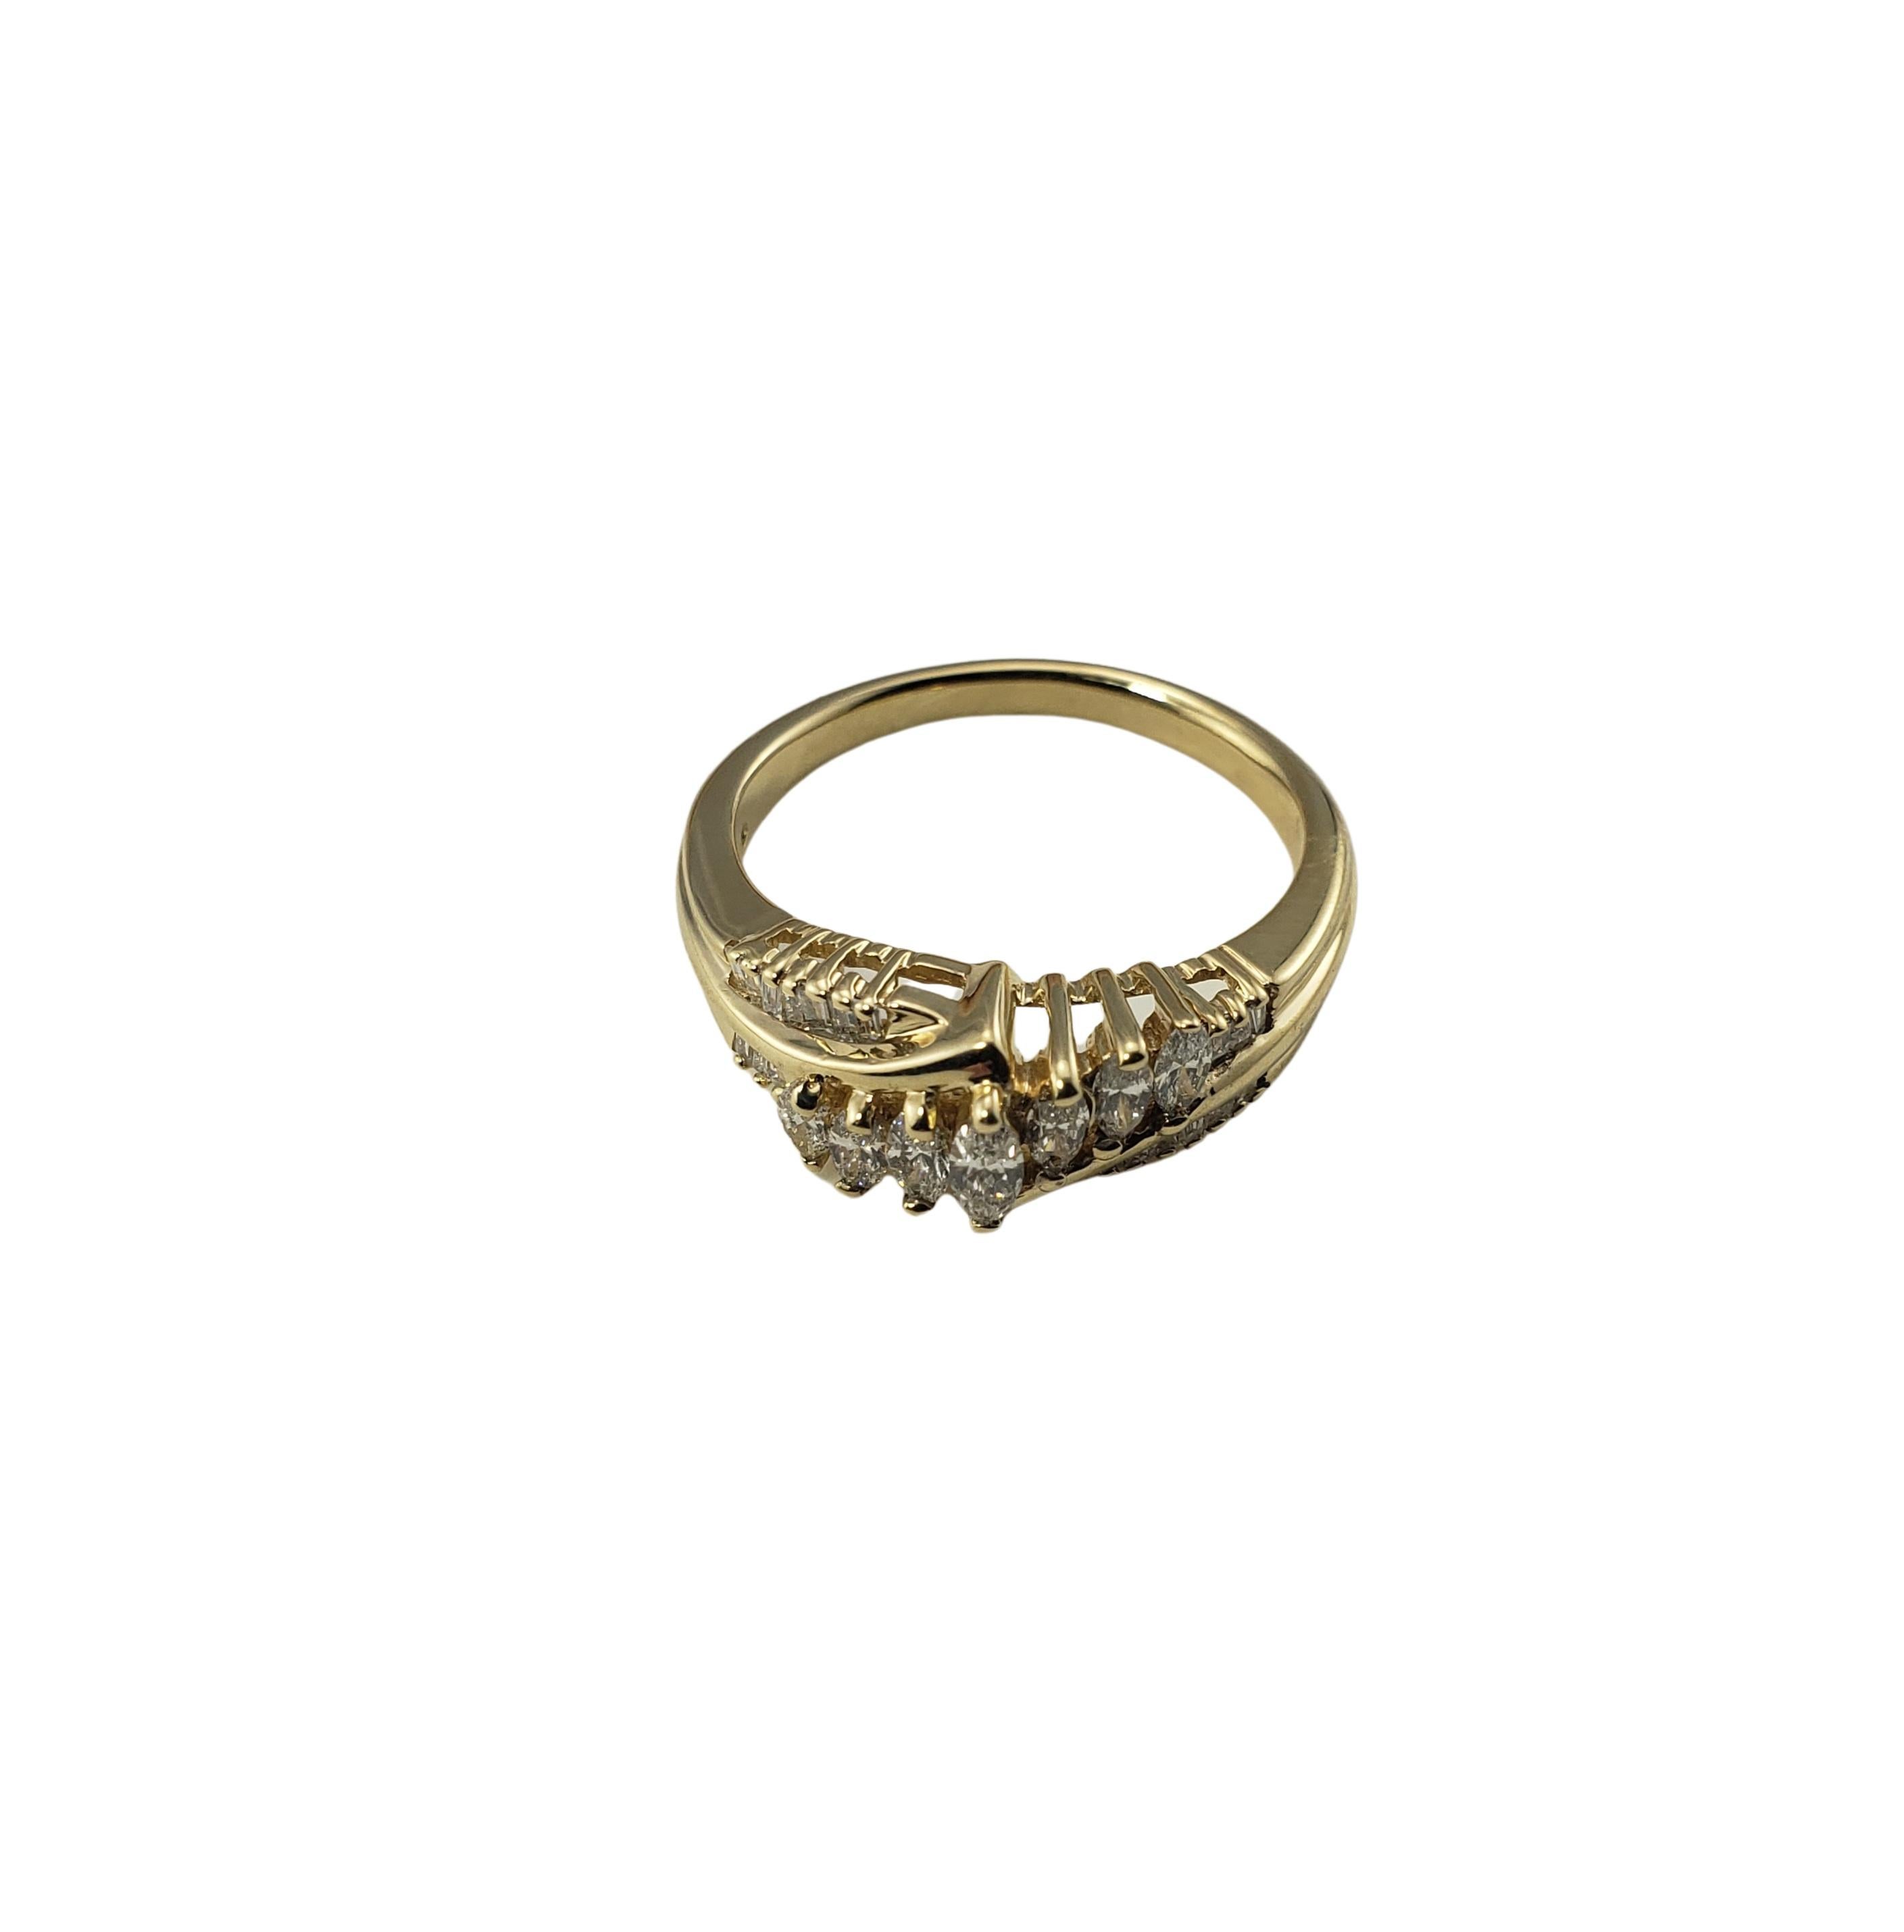 Vintage 14 Karat Yellow Gold and Diamond Ring Size 7.25-

This lovely ring features seven marquis diamonds and 19 baguette diamonds set in classic 14K yellow gold. Width: 6 mm.
Shank: 2 mm.

Approximate total diamond weight: .50 ct.

Diamond color: